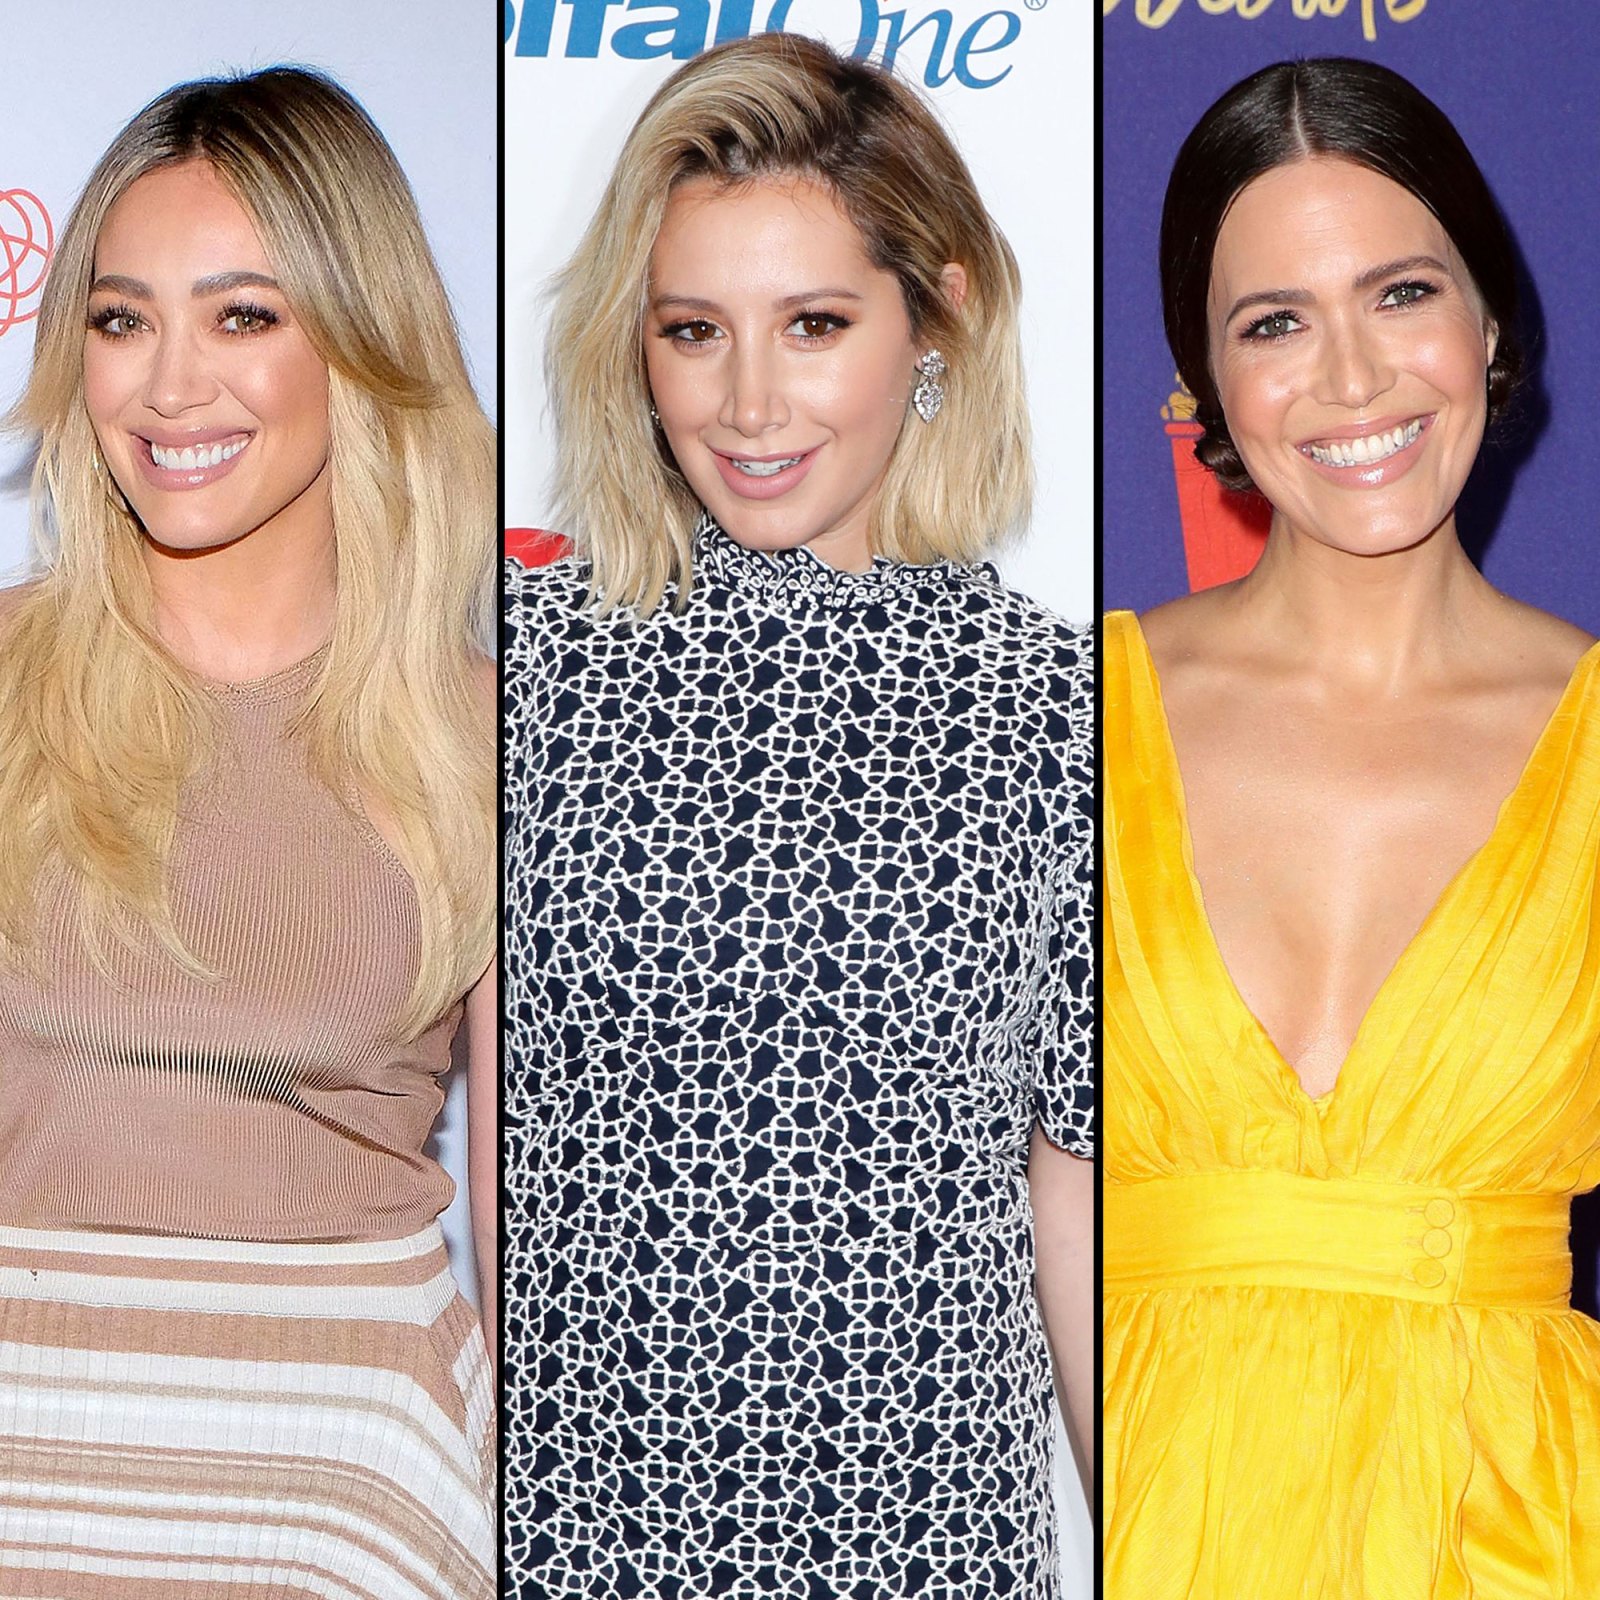 Hilary Duff Ashley Tisdale Mandy Moore More Moms Host Baby Music Class